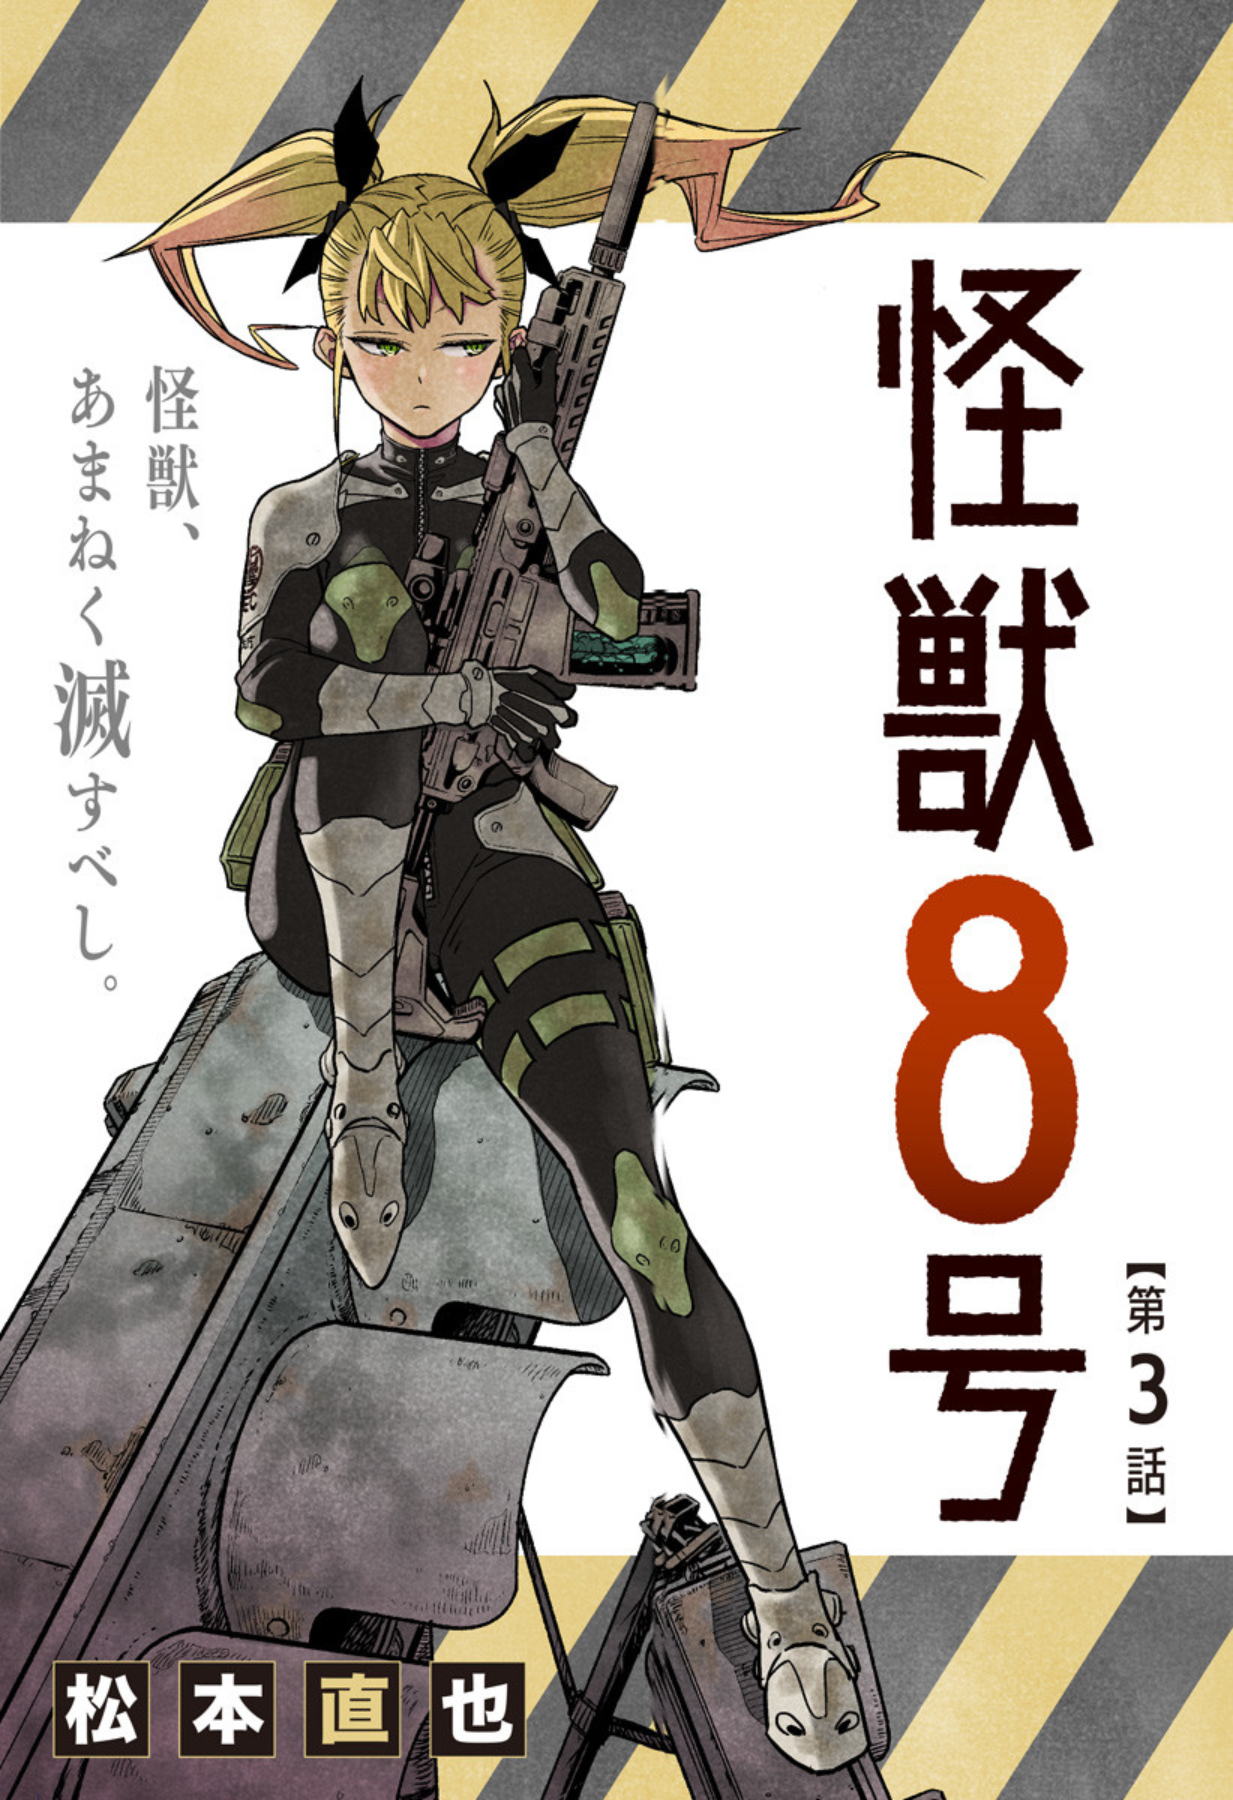 Kaiju No 8 Vol 3  Book by Naoya Matsumoto  Official Publisher Page   Simon  Schuster India